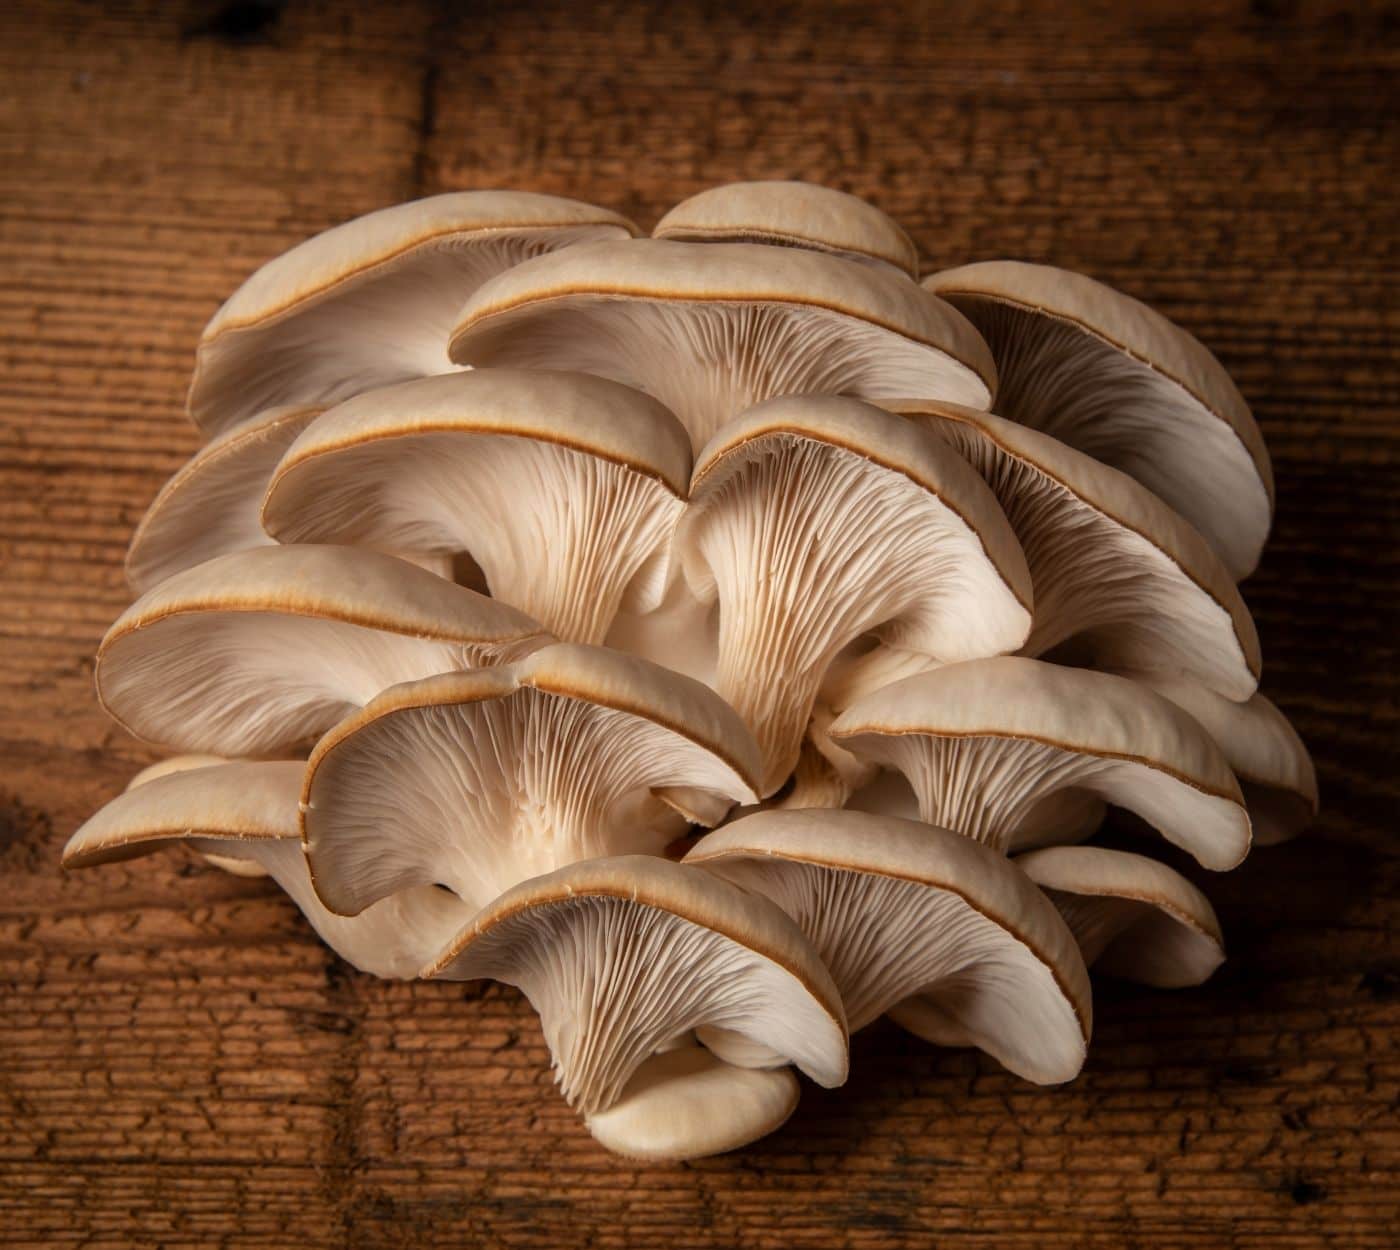 A cluster of oyster mushrooms on a wood table.